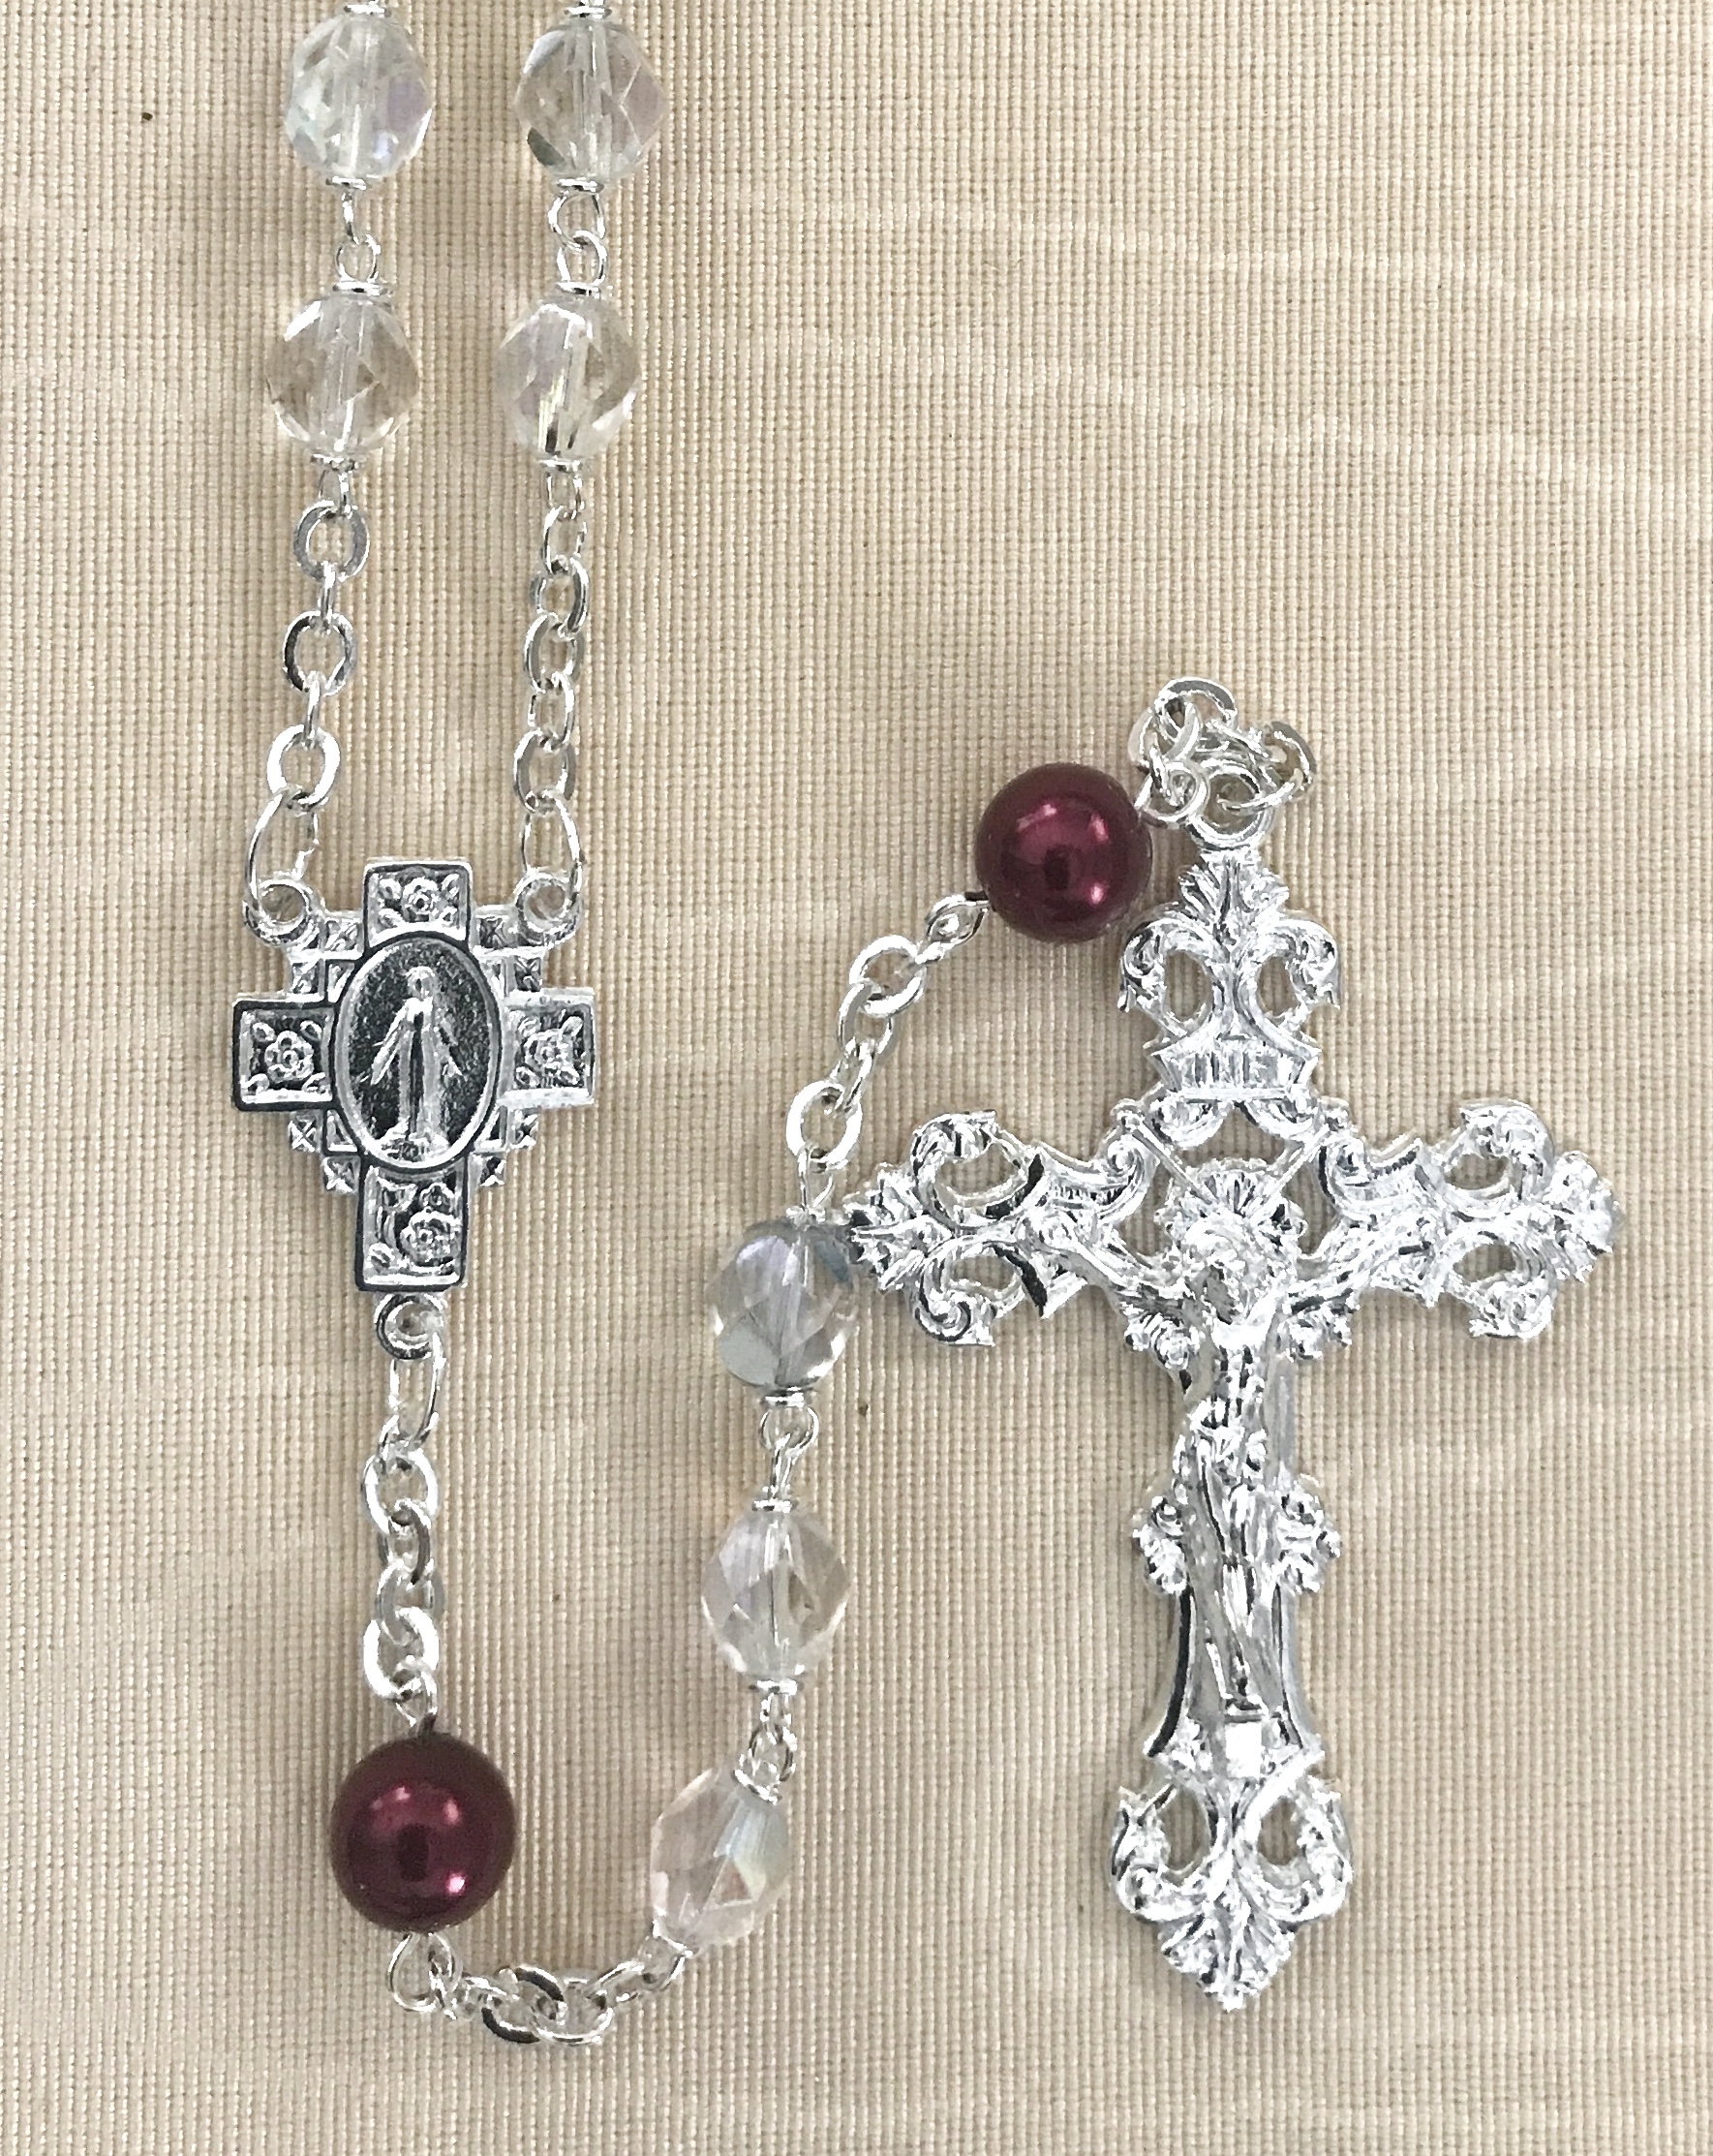 7mm CRYSTAL AB WITH GARNET PEARL OUR FATHER BEADS STERLING SILVER PLATED ROSARY GIFT BOXED